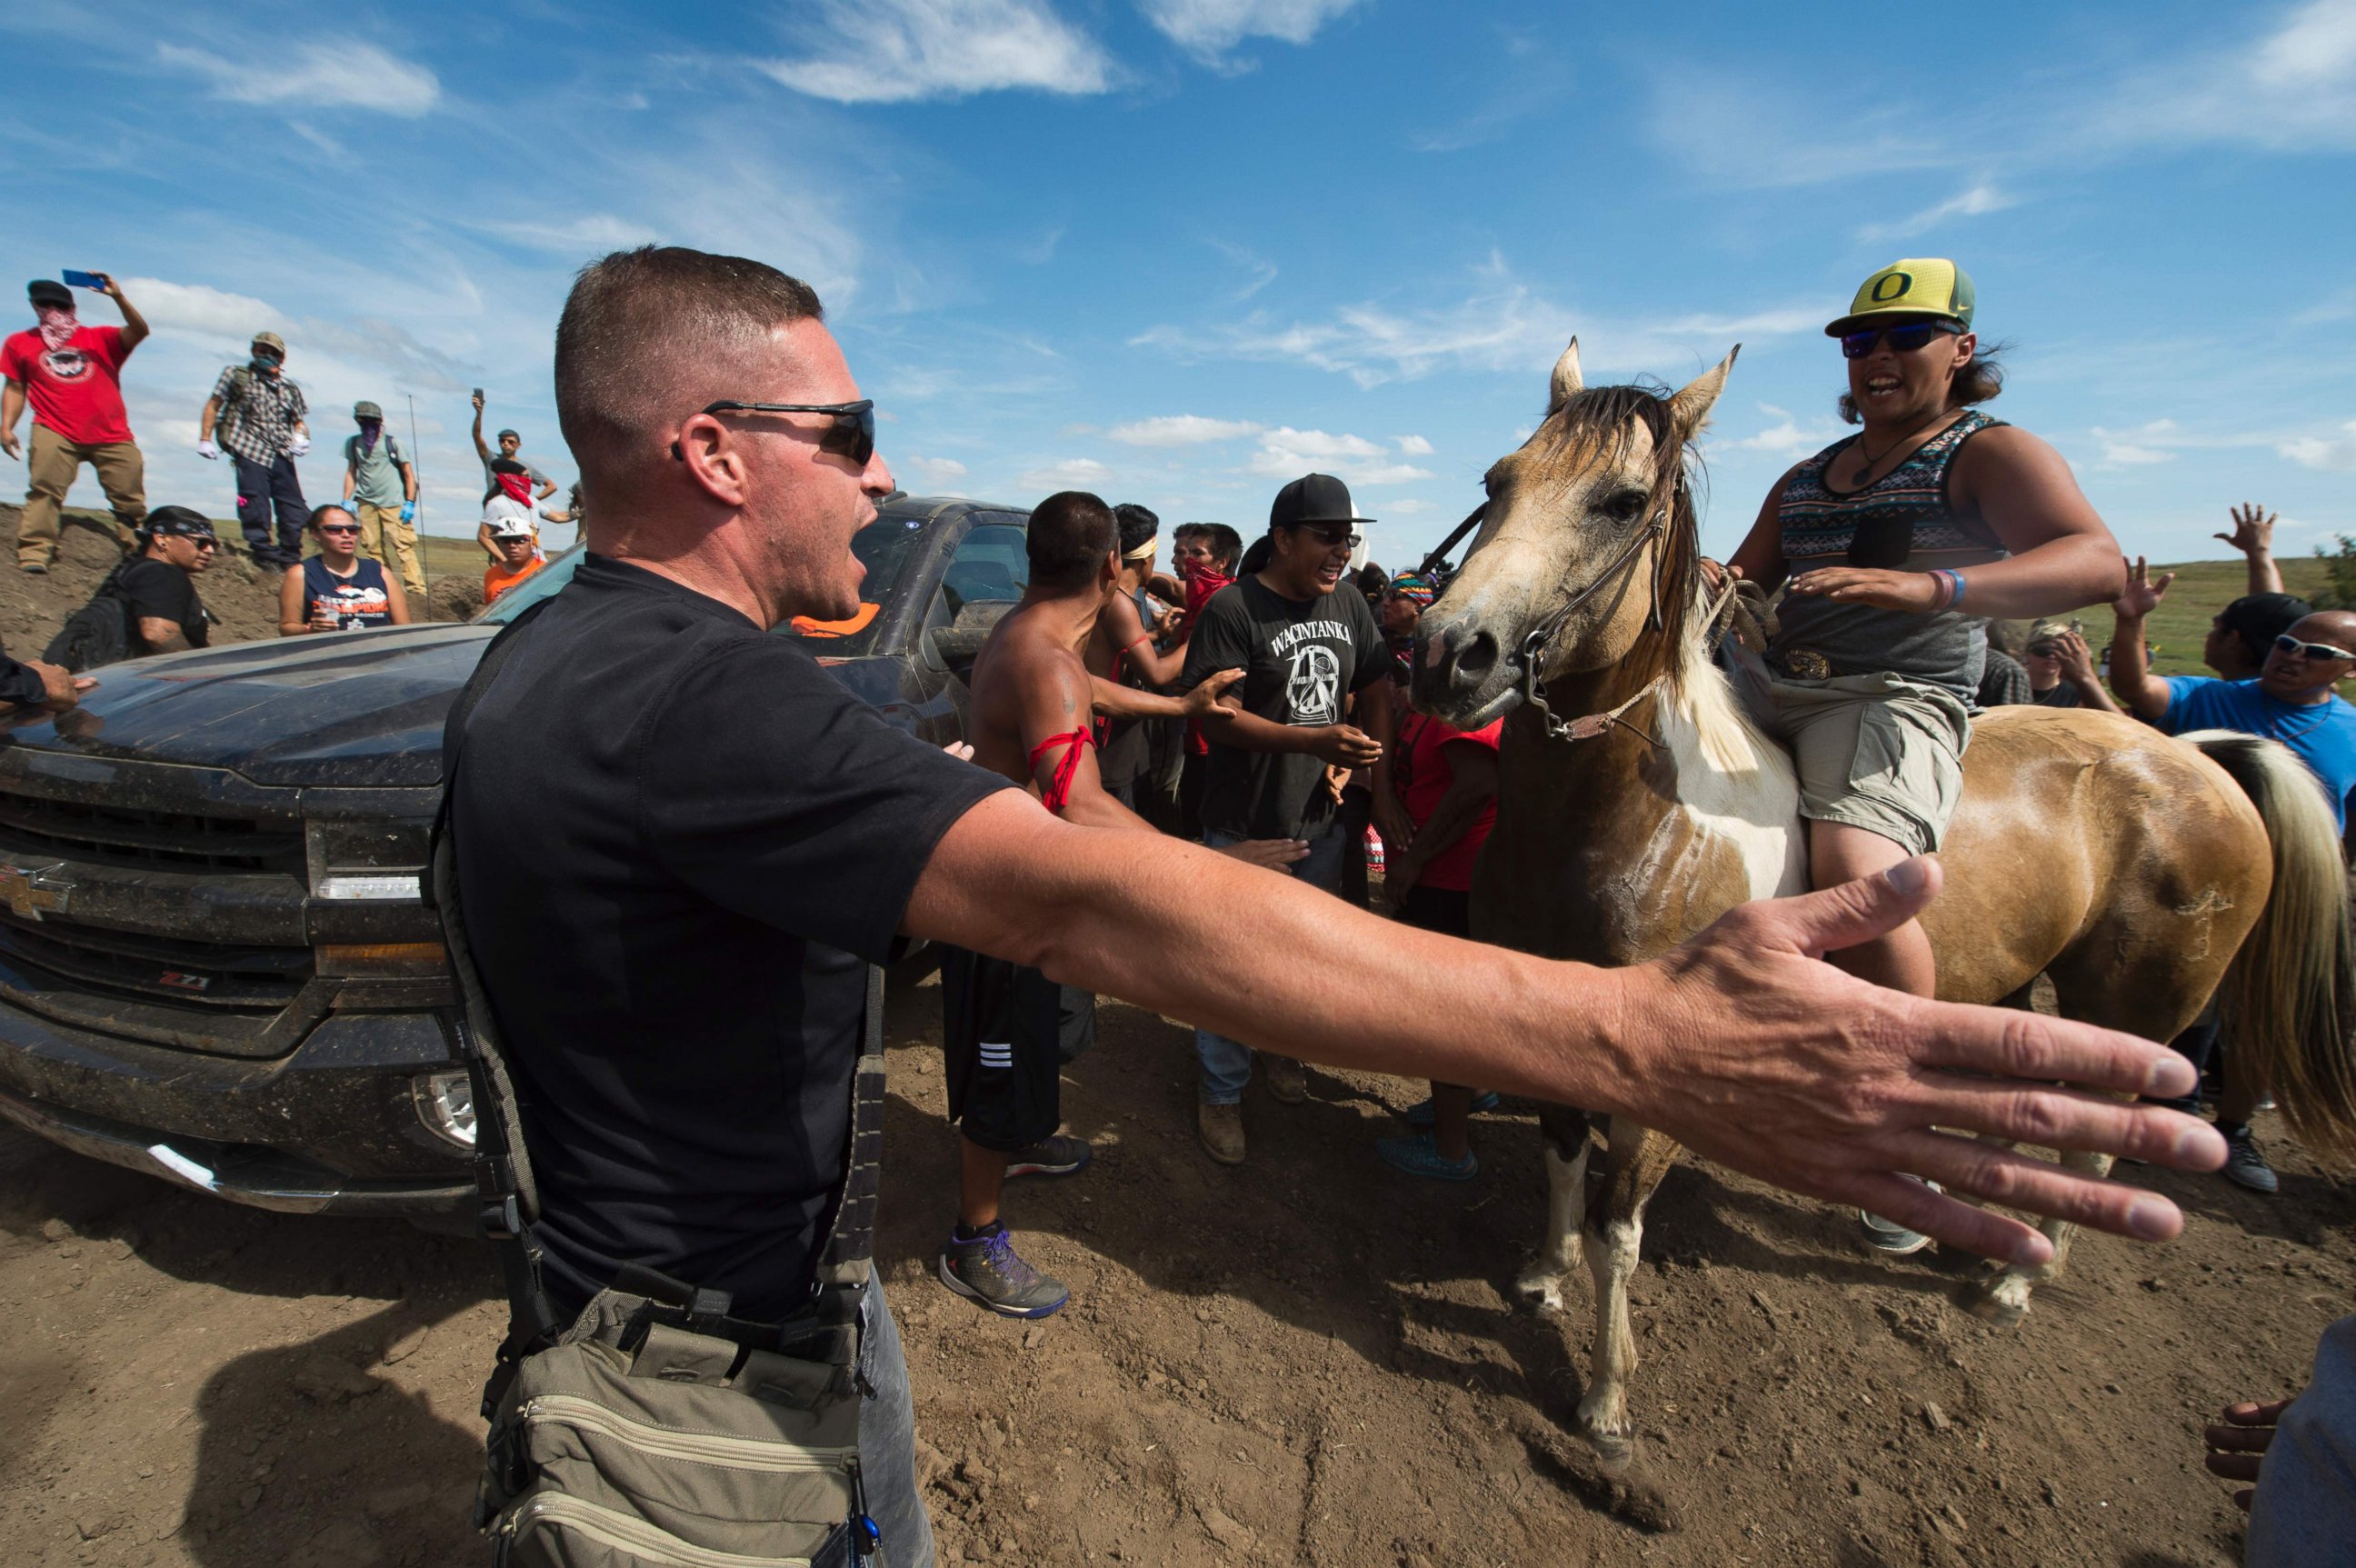 PHOTO: Native American protestors and their supporters are confronted by security during a demonstration against work being done for the Dakota Access Pipeline (DAPL) oil pipeline, near Cannonball, North Dakota, Sept. 3, 2016.